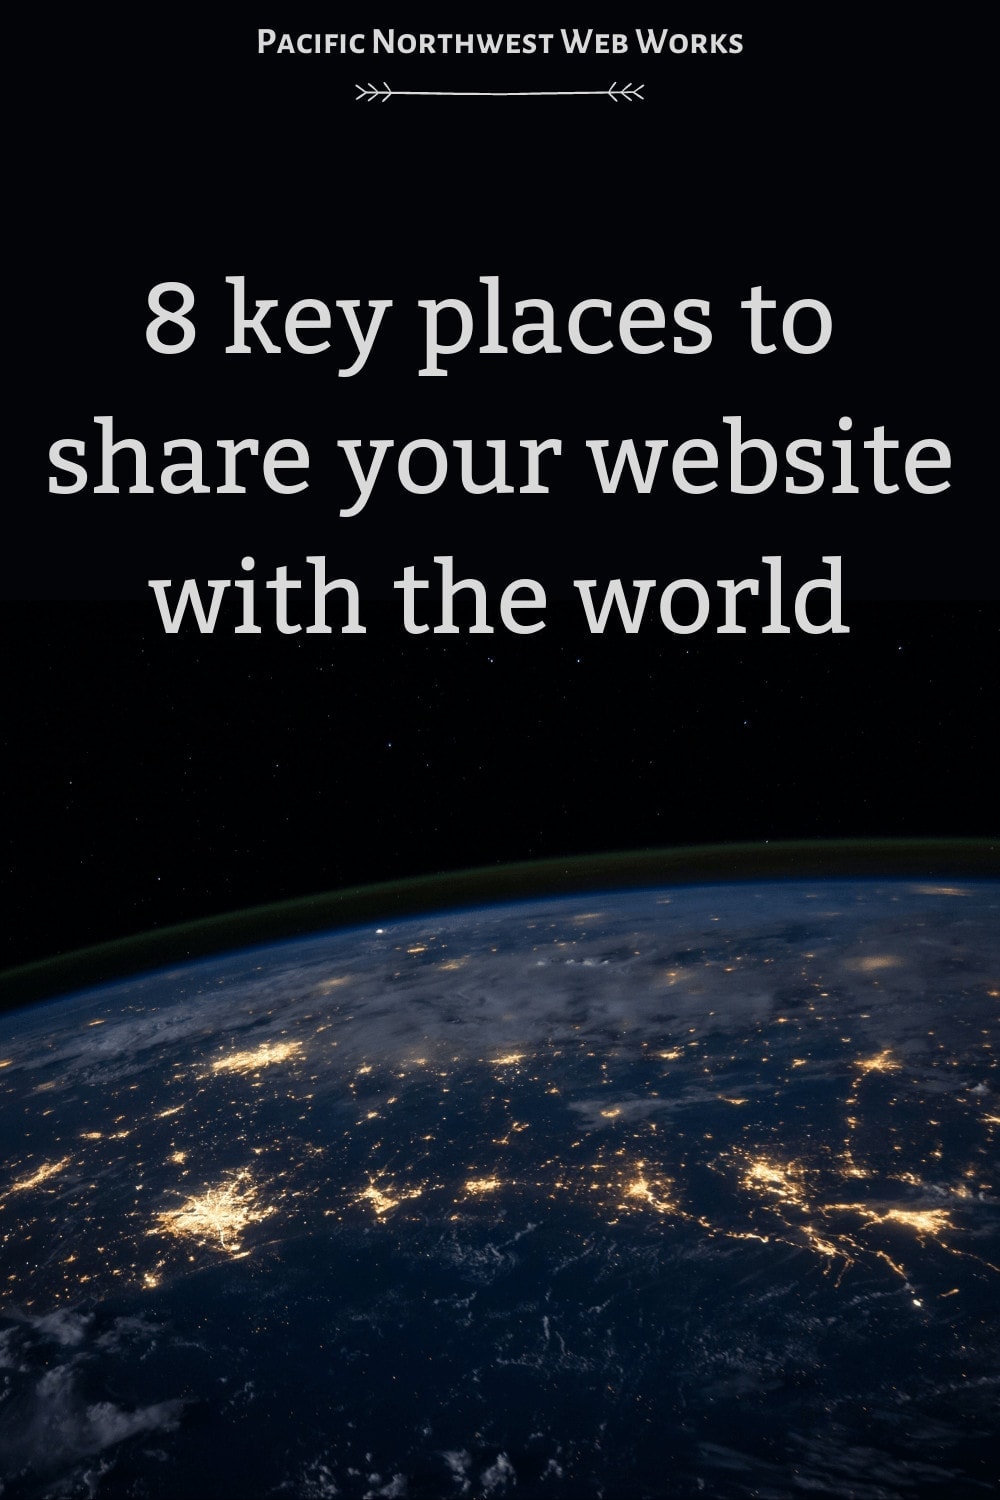 8 key places to share your website with the world